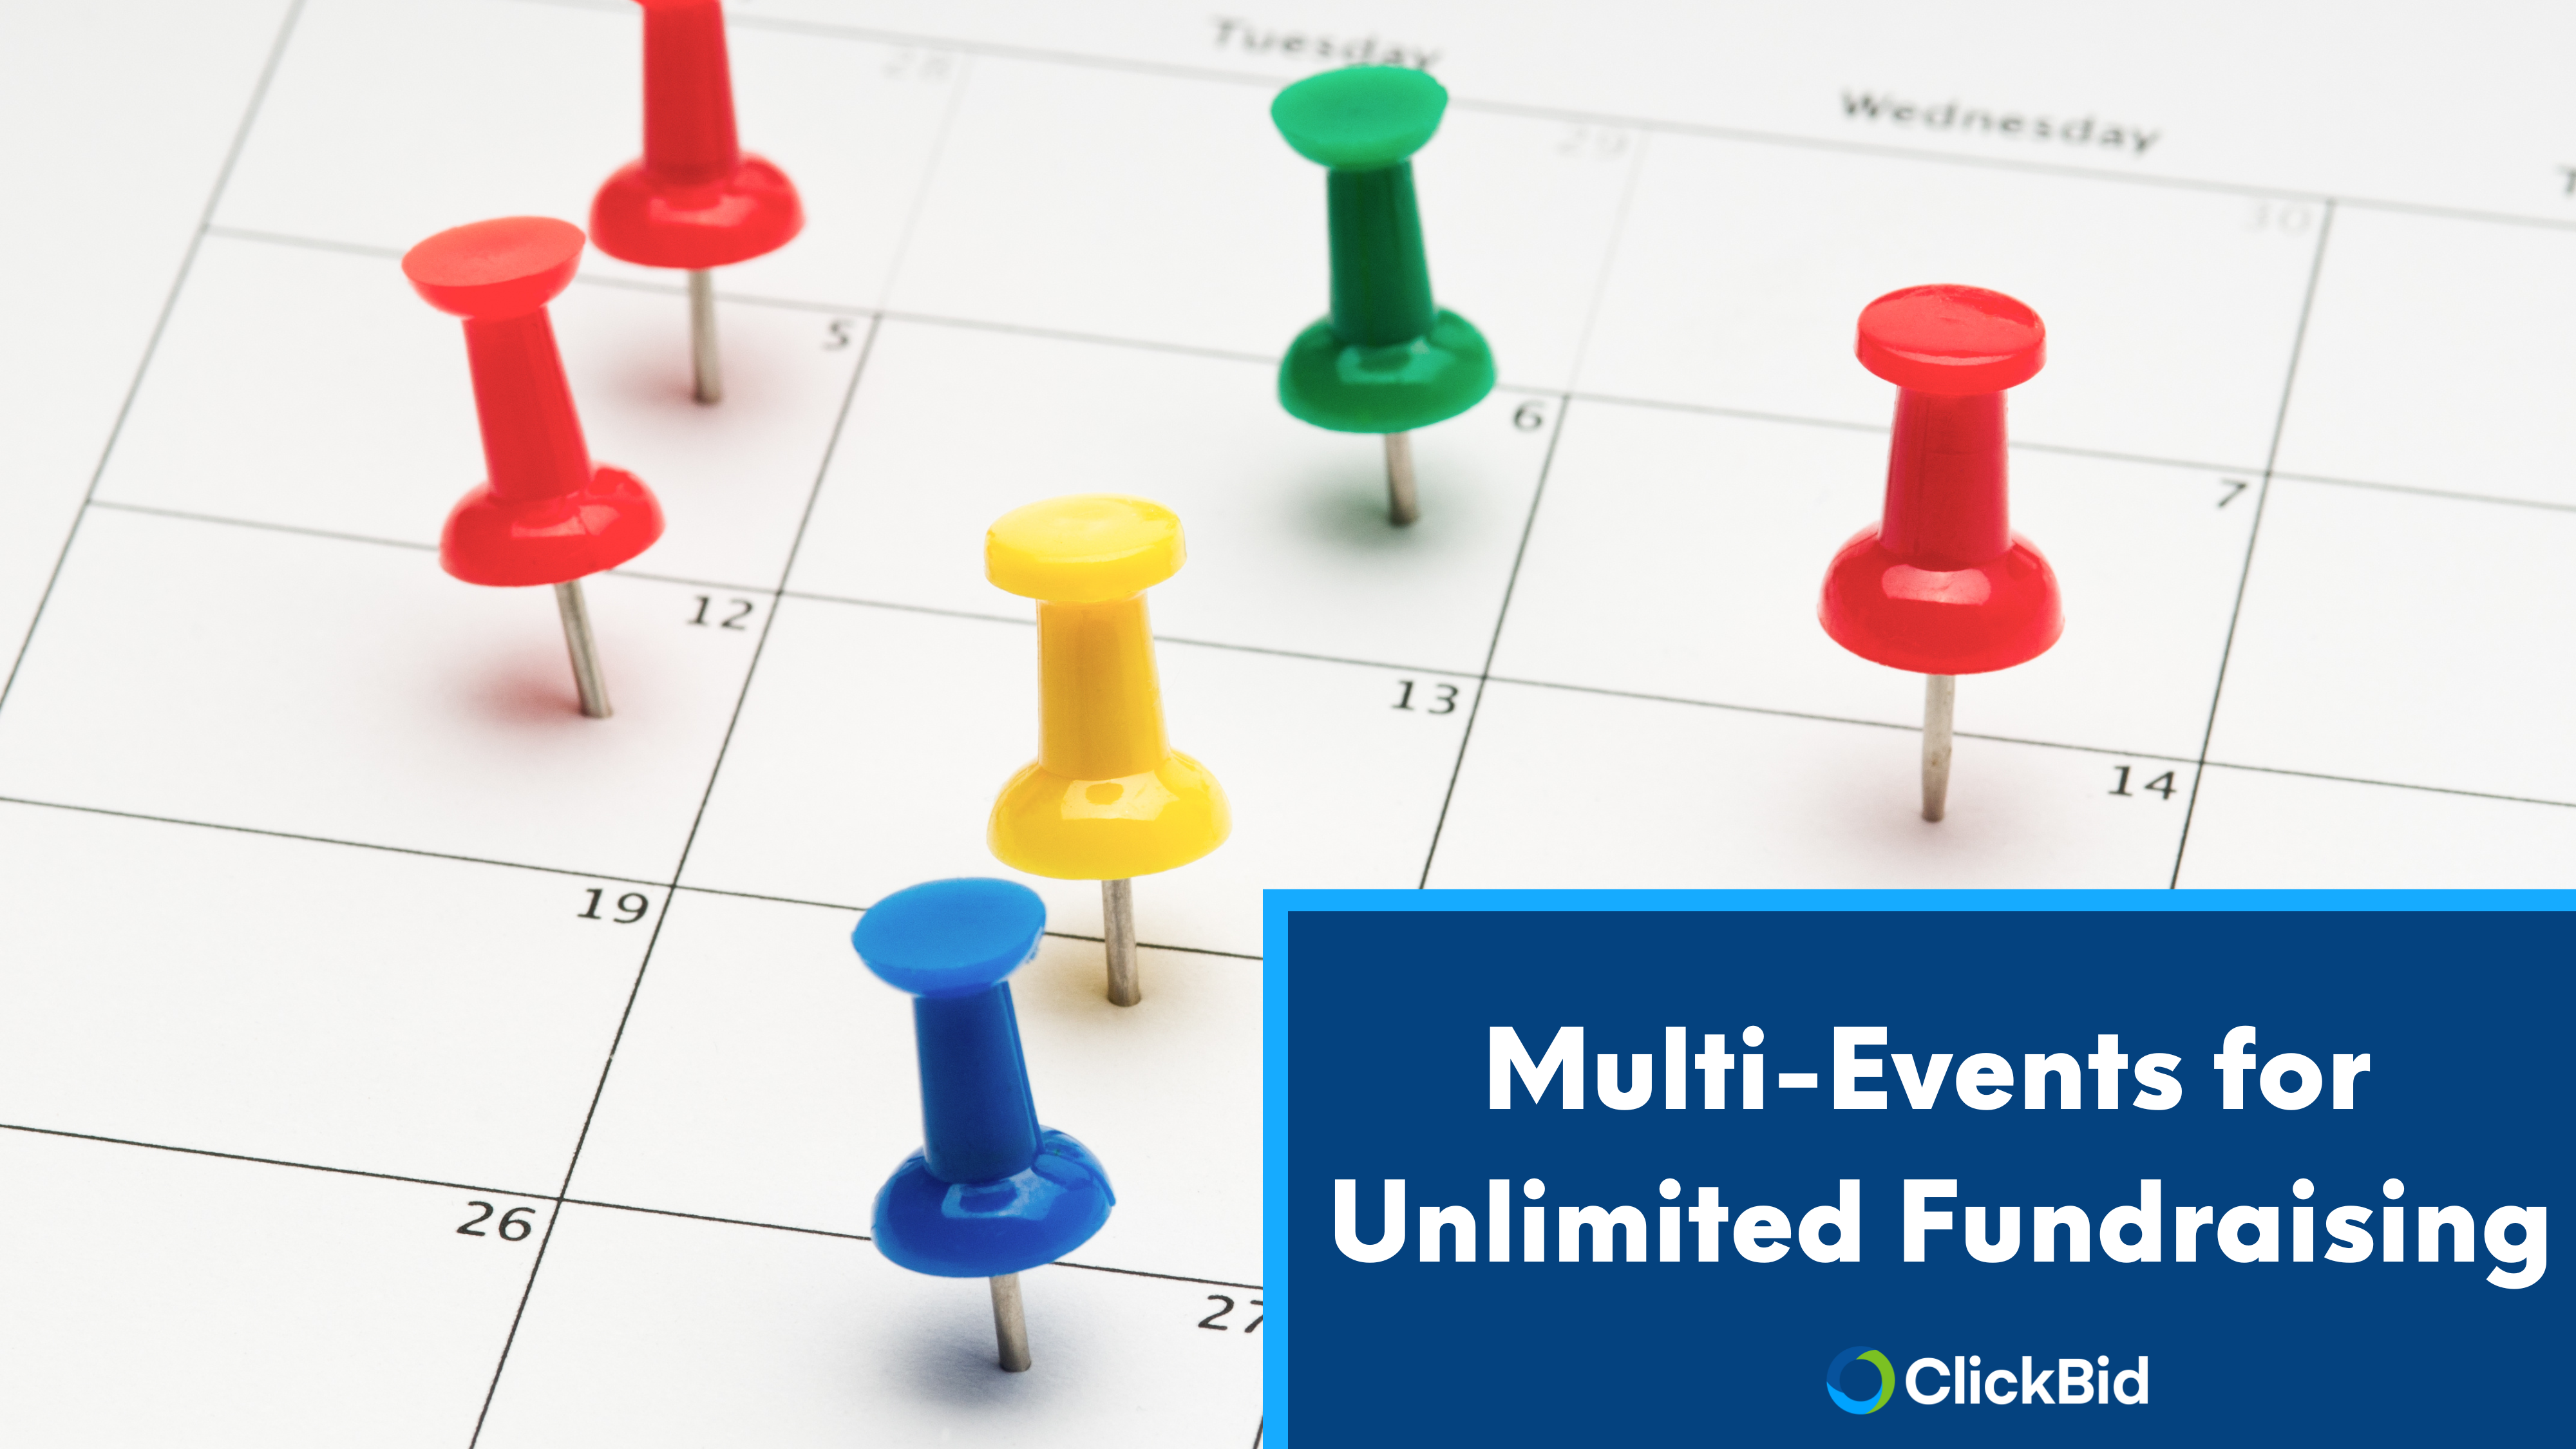 Multi-Events for Unlimited Fundraising